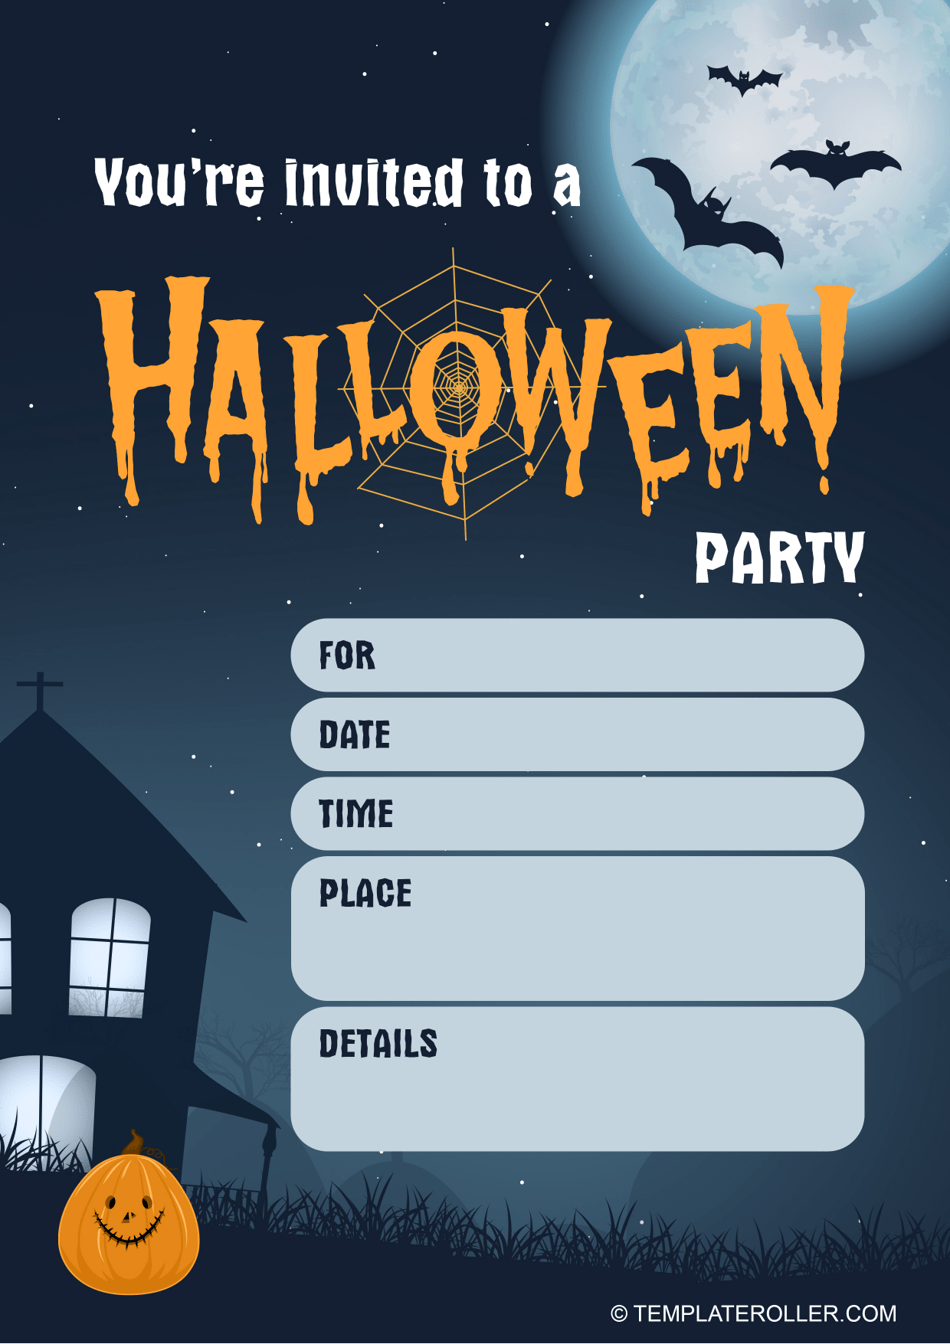 Halloween Party Invitation Template - Dark Preview